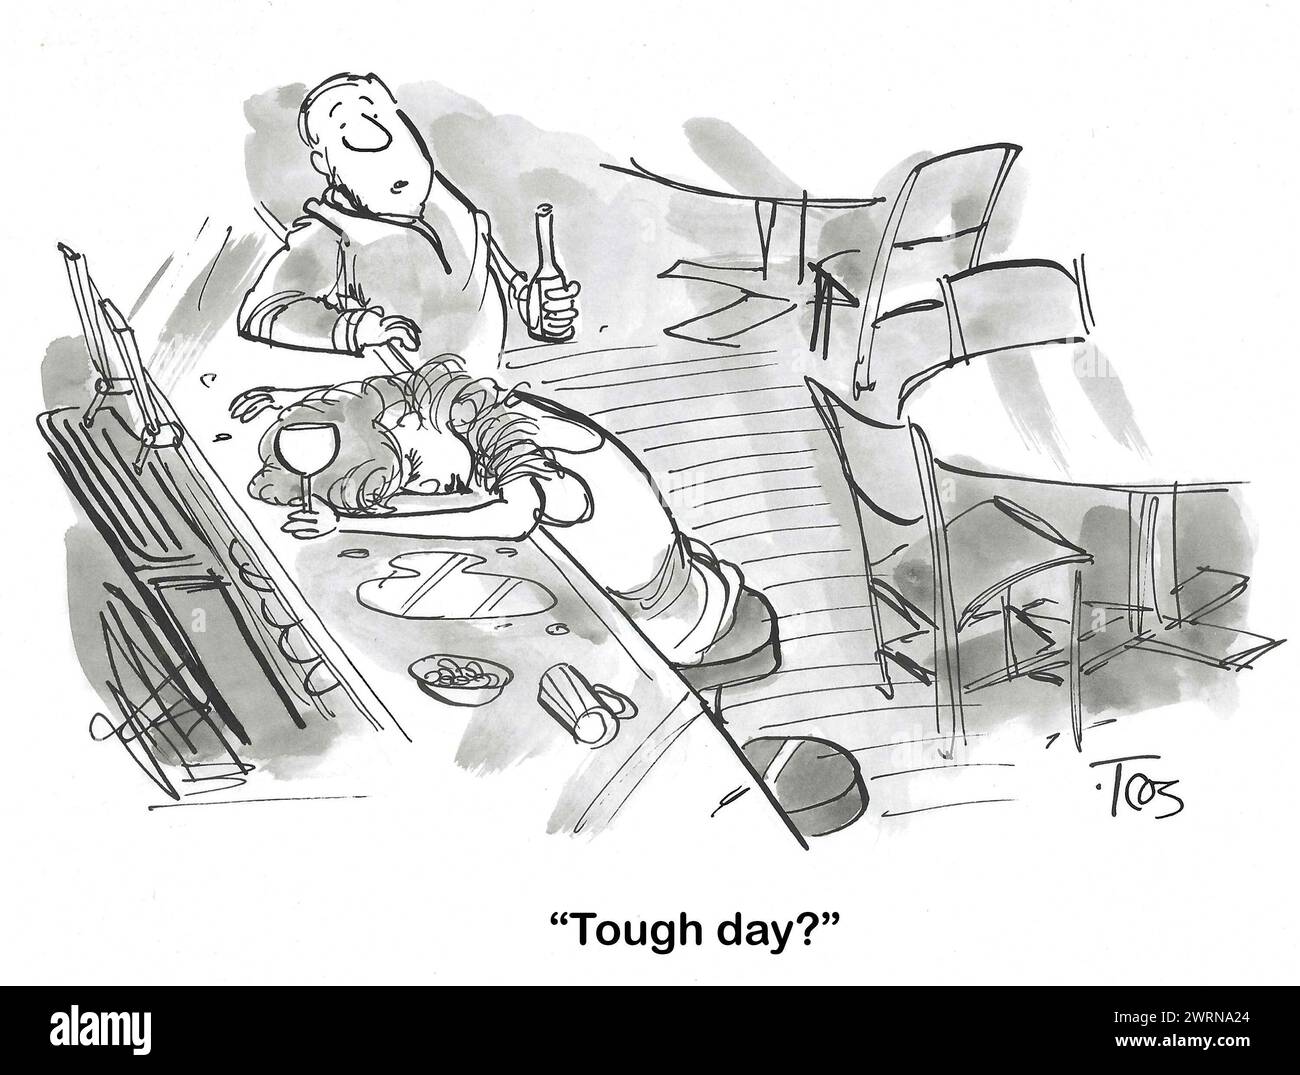 BW cartoon of a woman and man at a bar.  The woman has her head down, sleeping on the bartop.  The man asks her 'tough day?'. Stock Photo